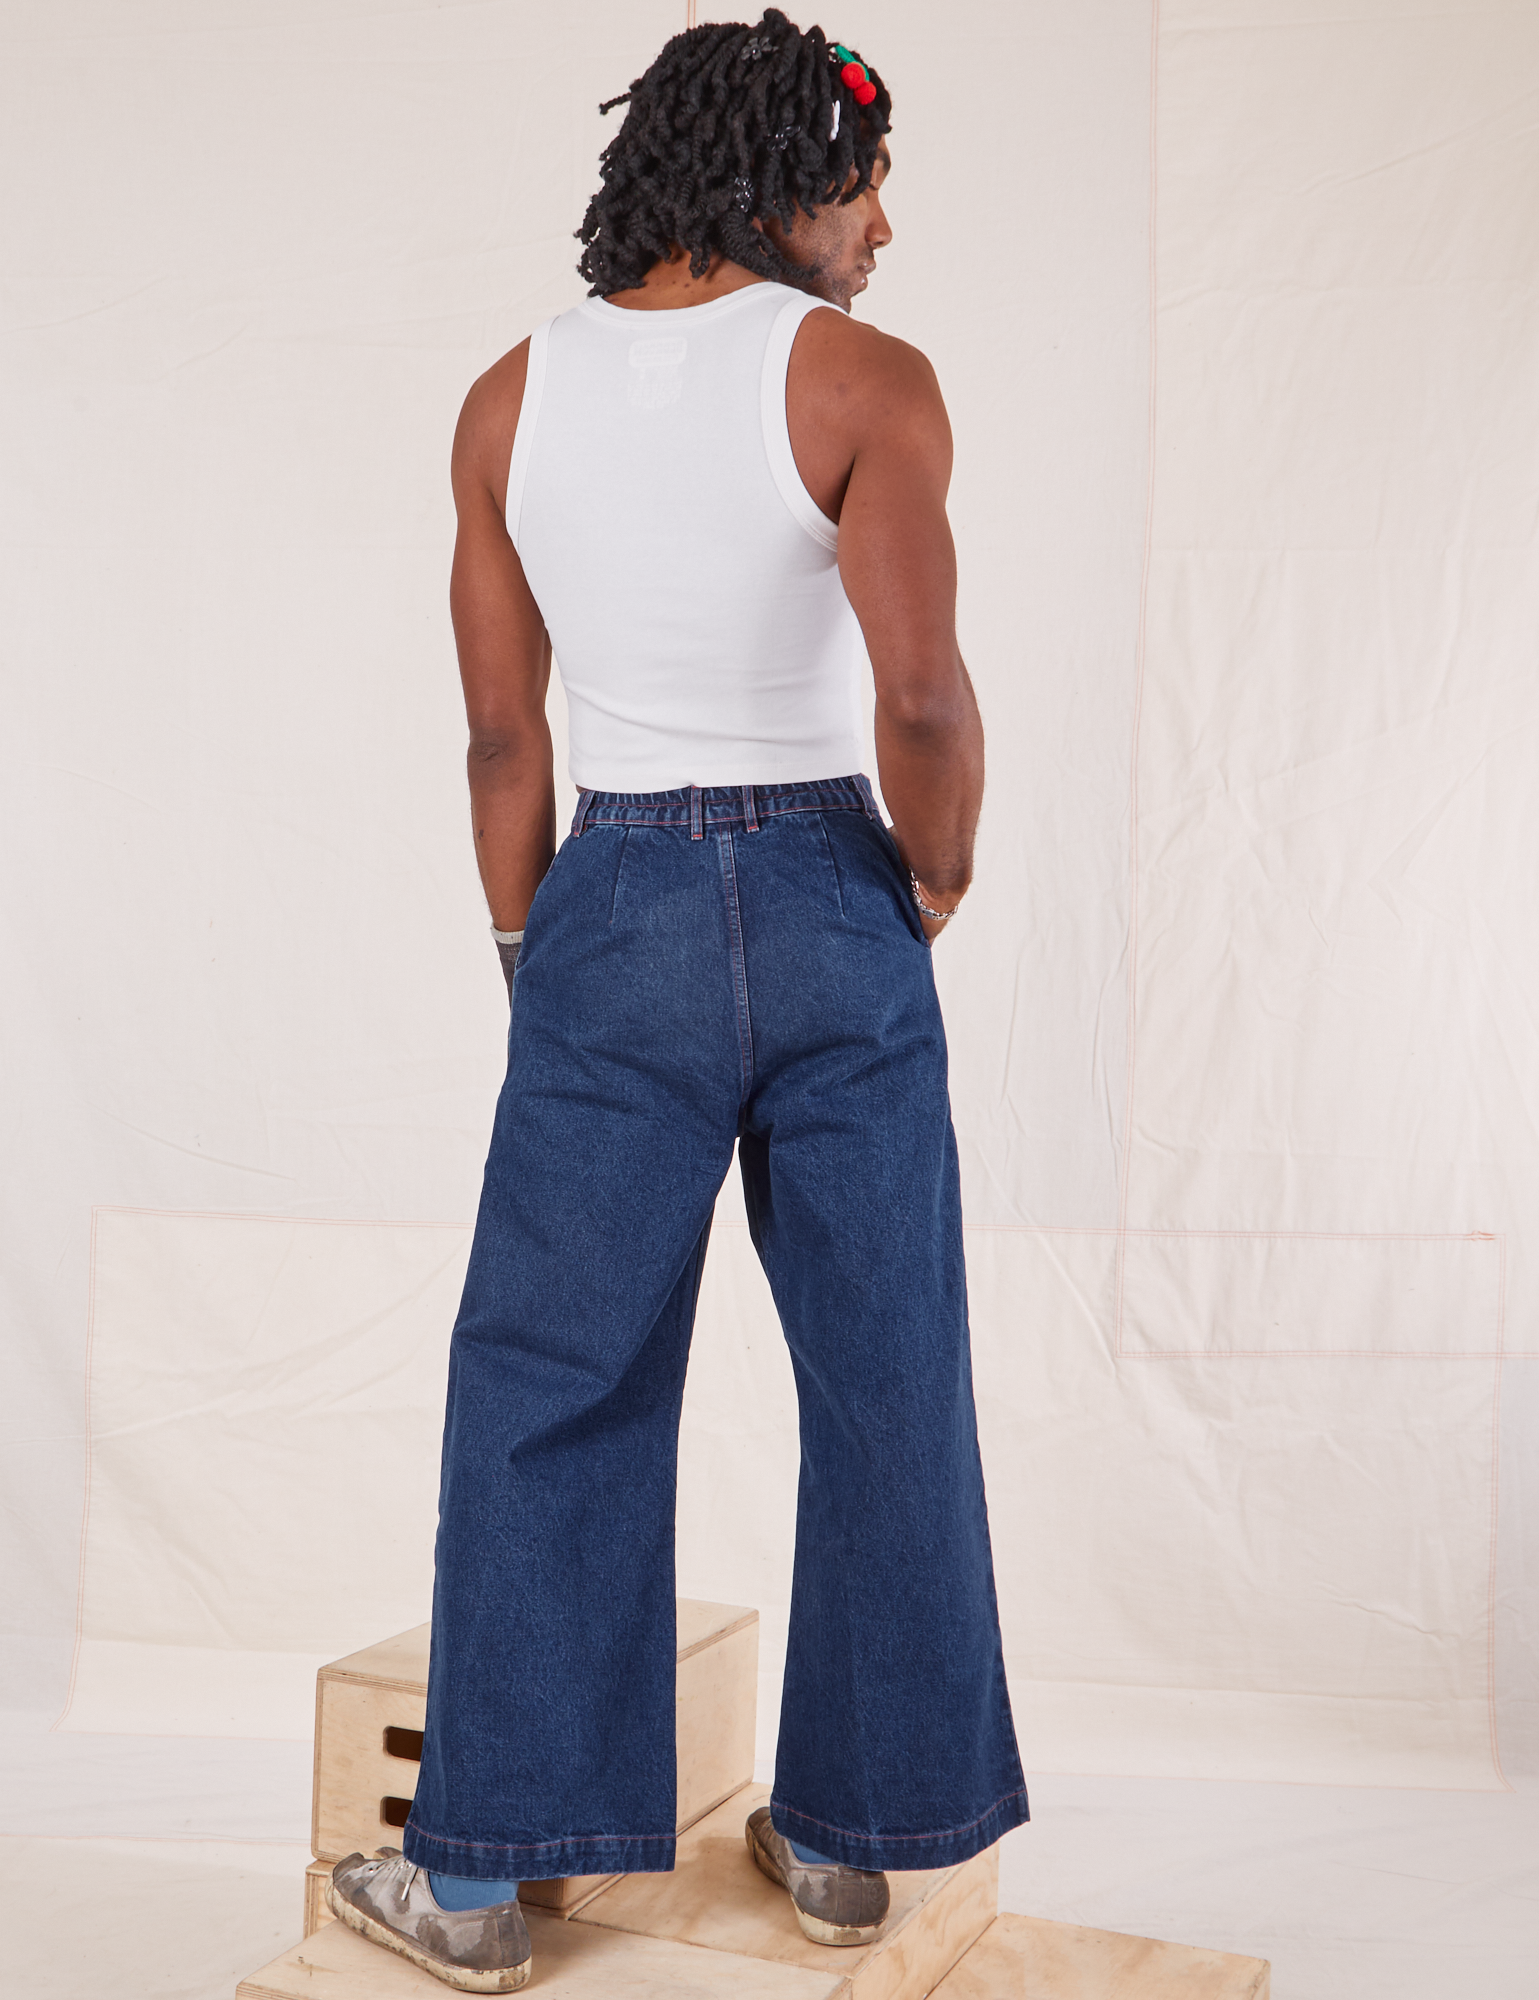 Back view of Indigo Wide Leg Trousers in Dark Wash and vintage off-white Tank Top on Jerrod